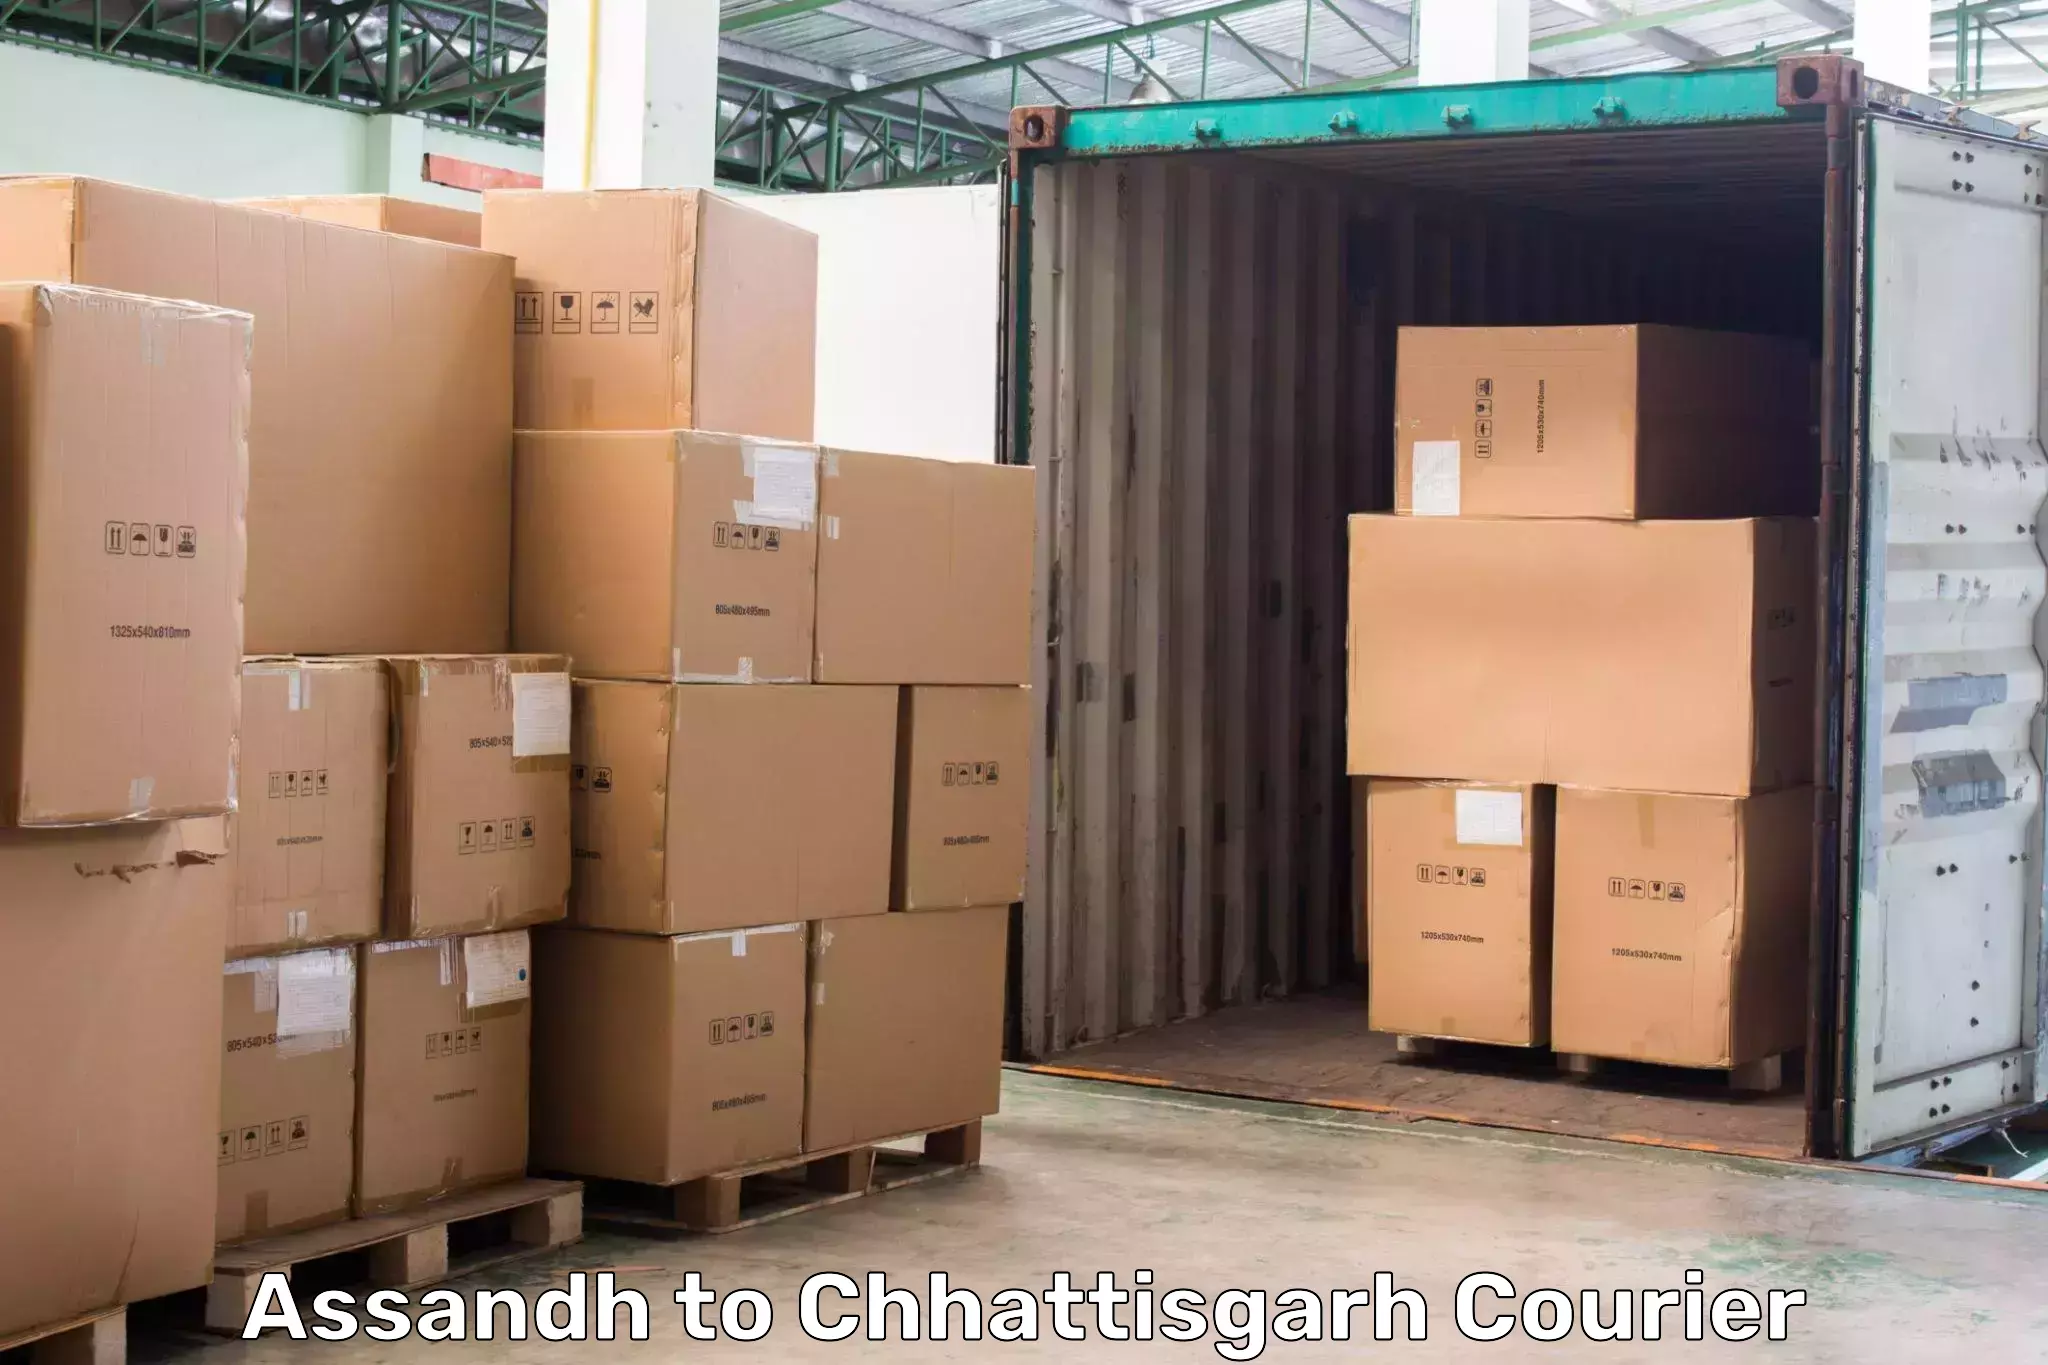 Delivery service partnership in Assandh to Chhattisgarh